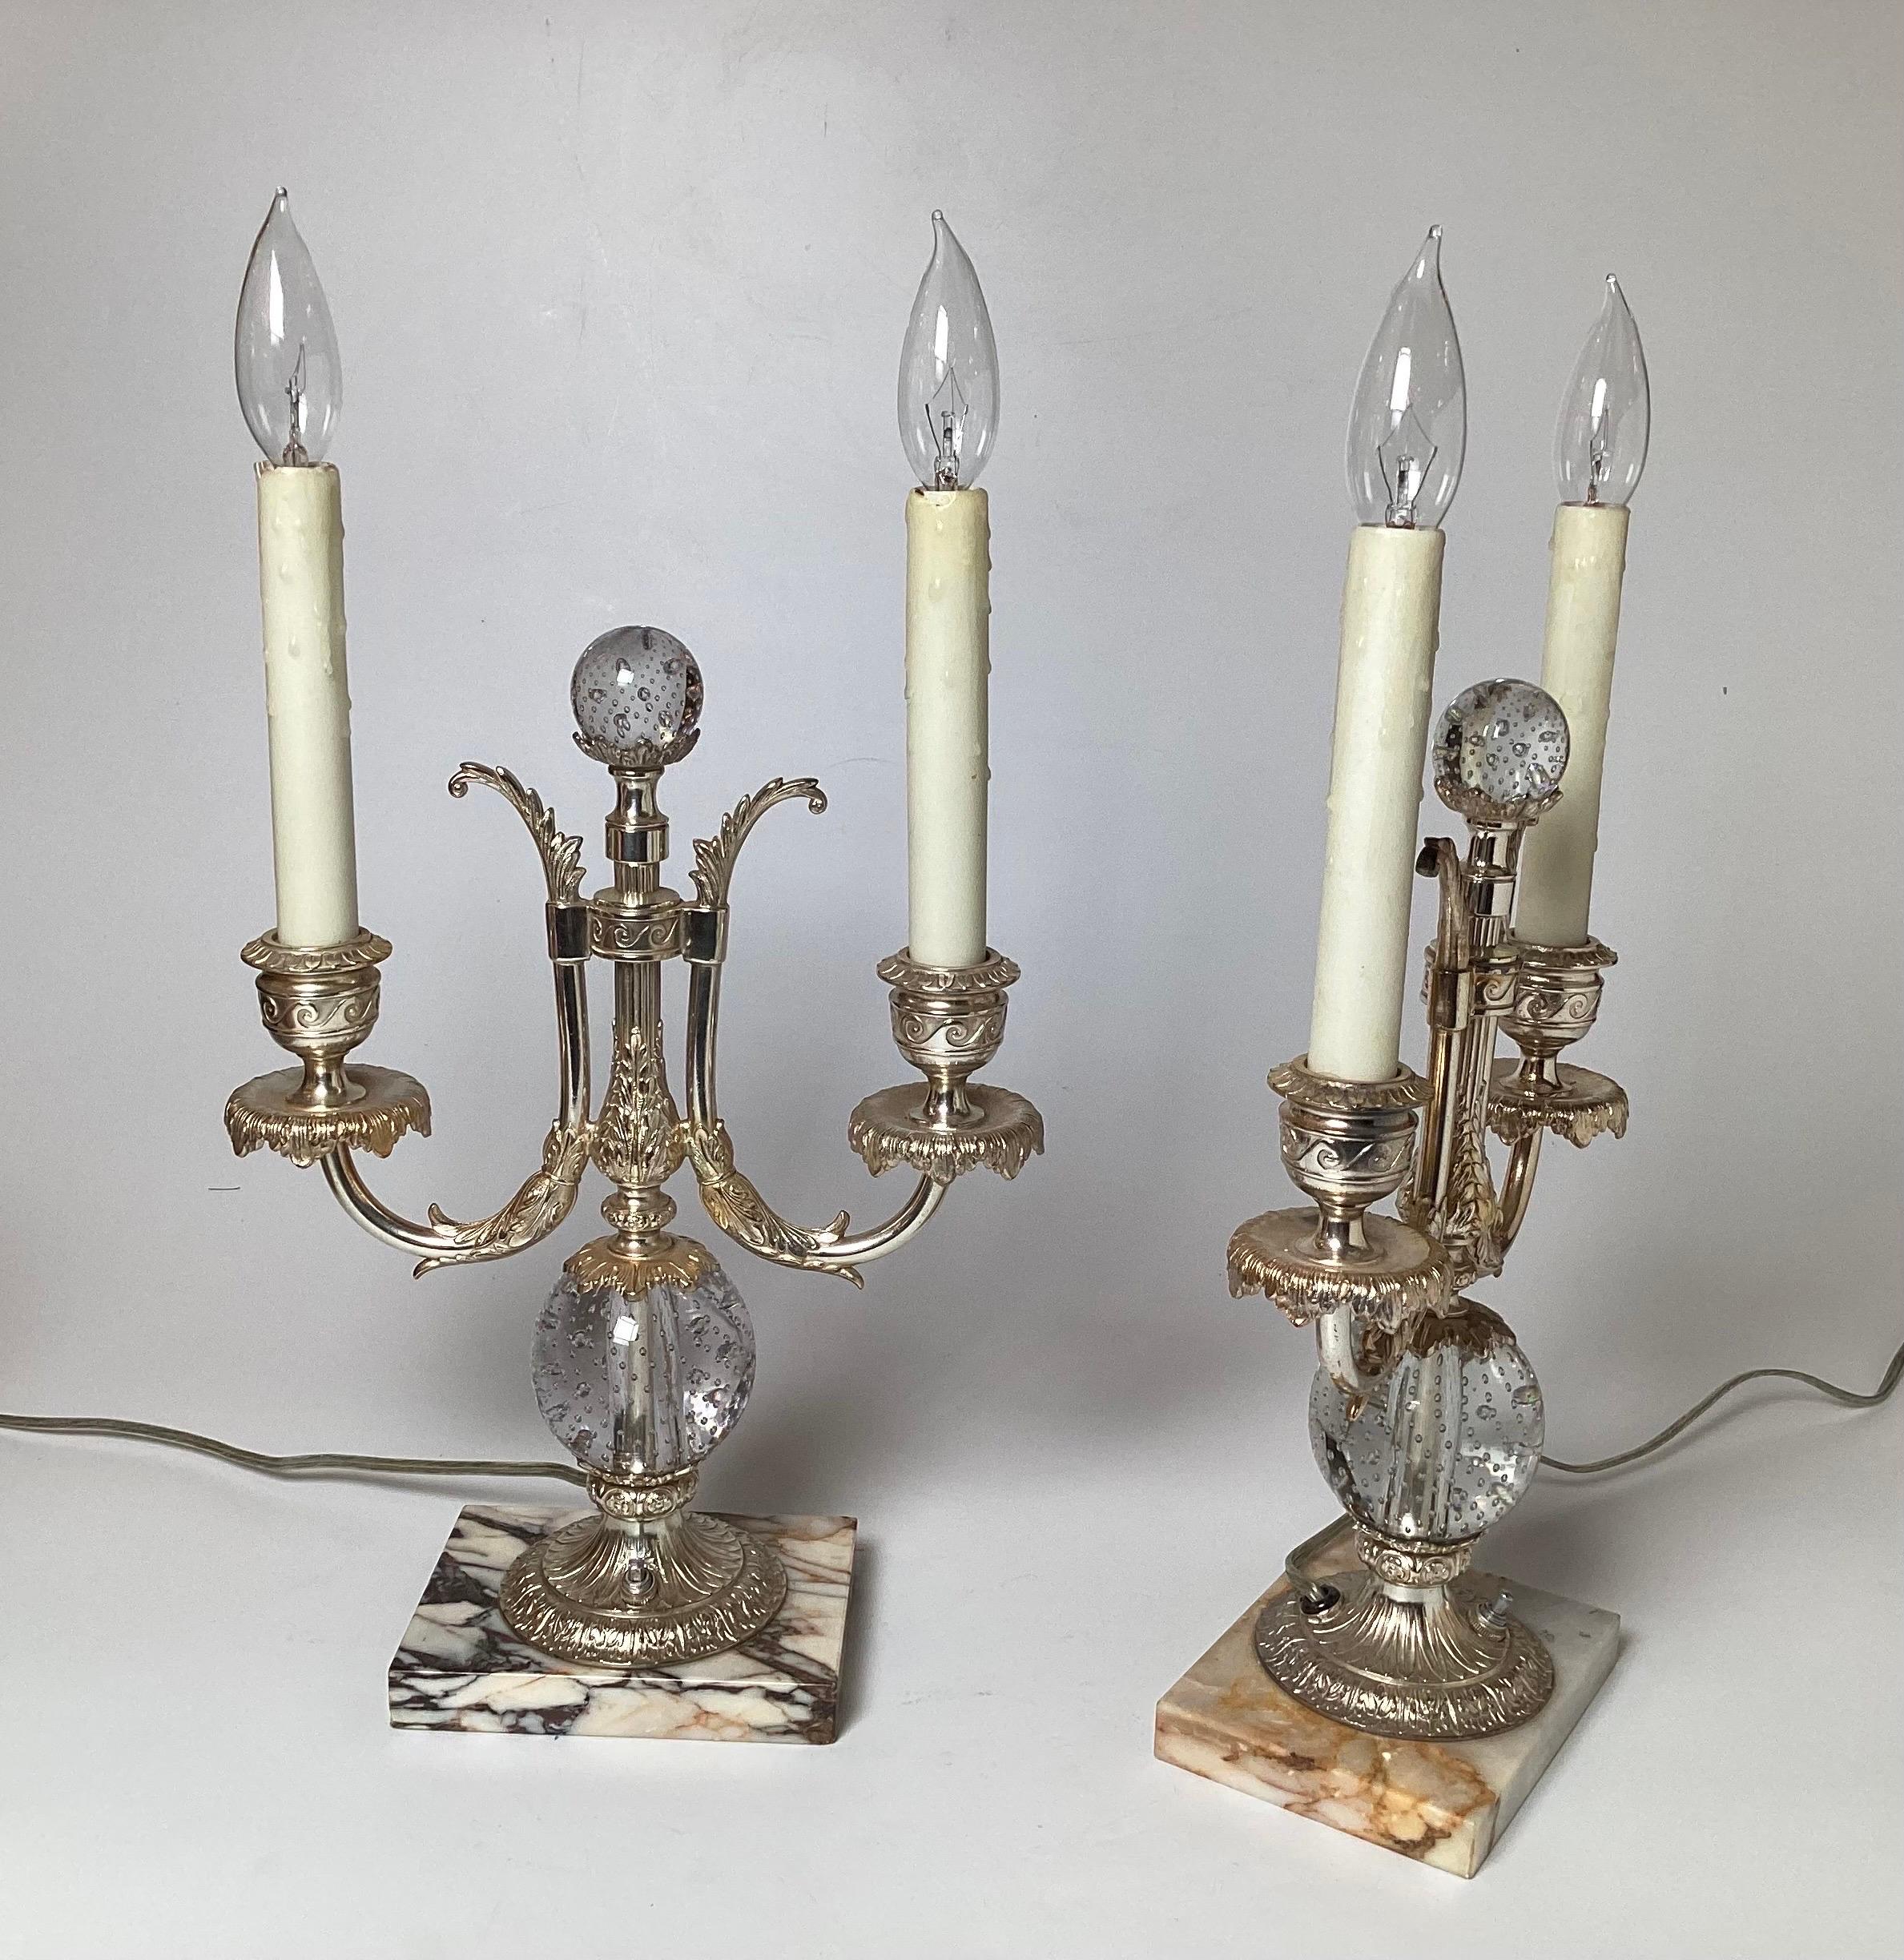 Pair of Silvered Bronze Candelabra Lamps by Pairpoint For Sale 3